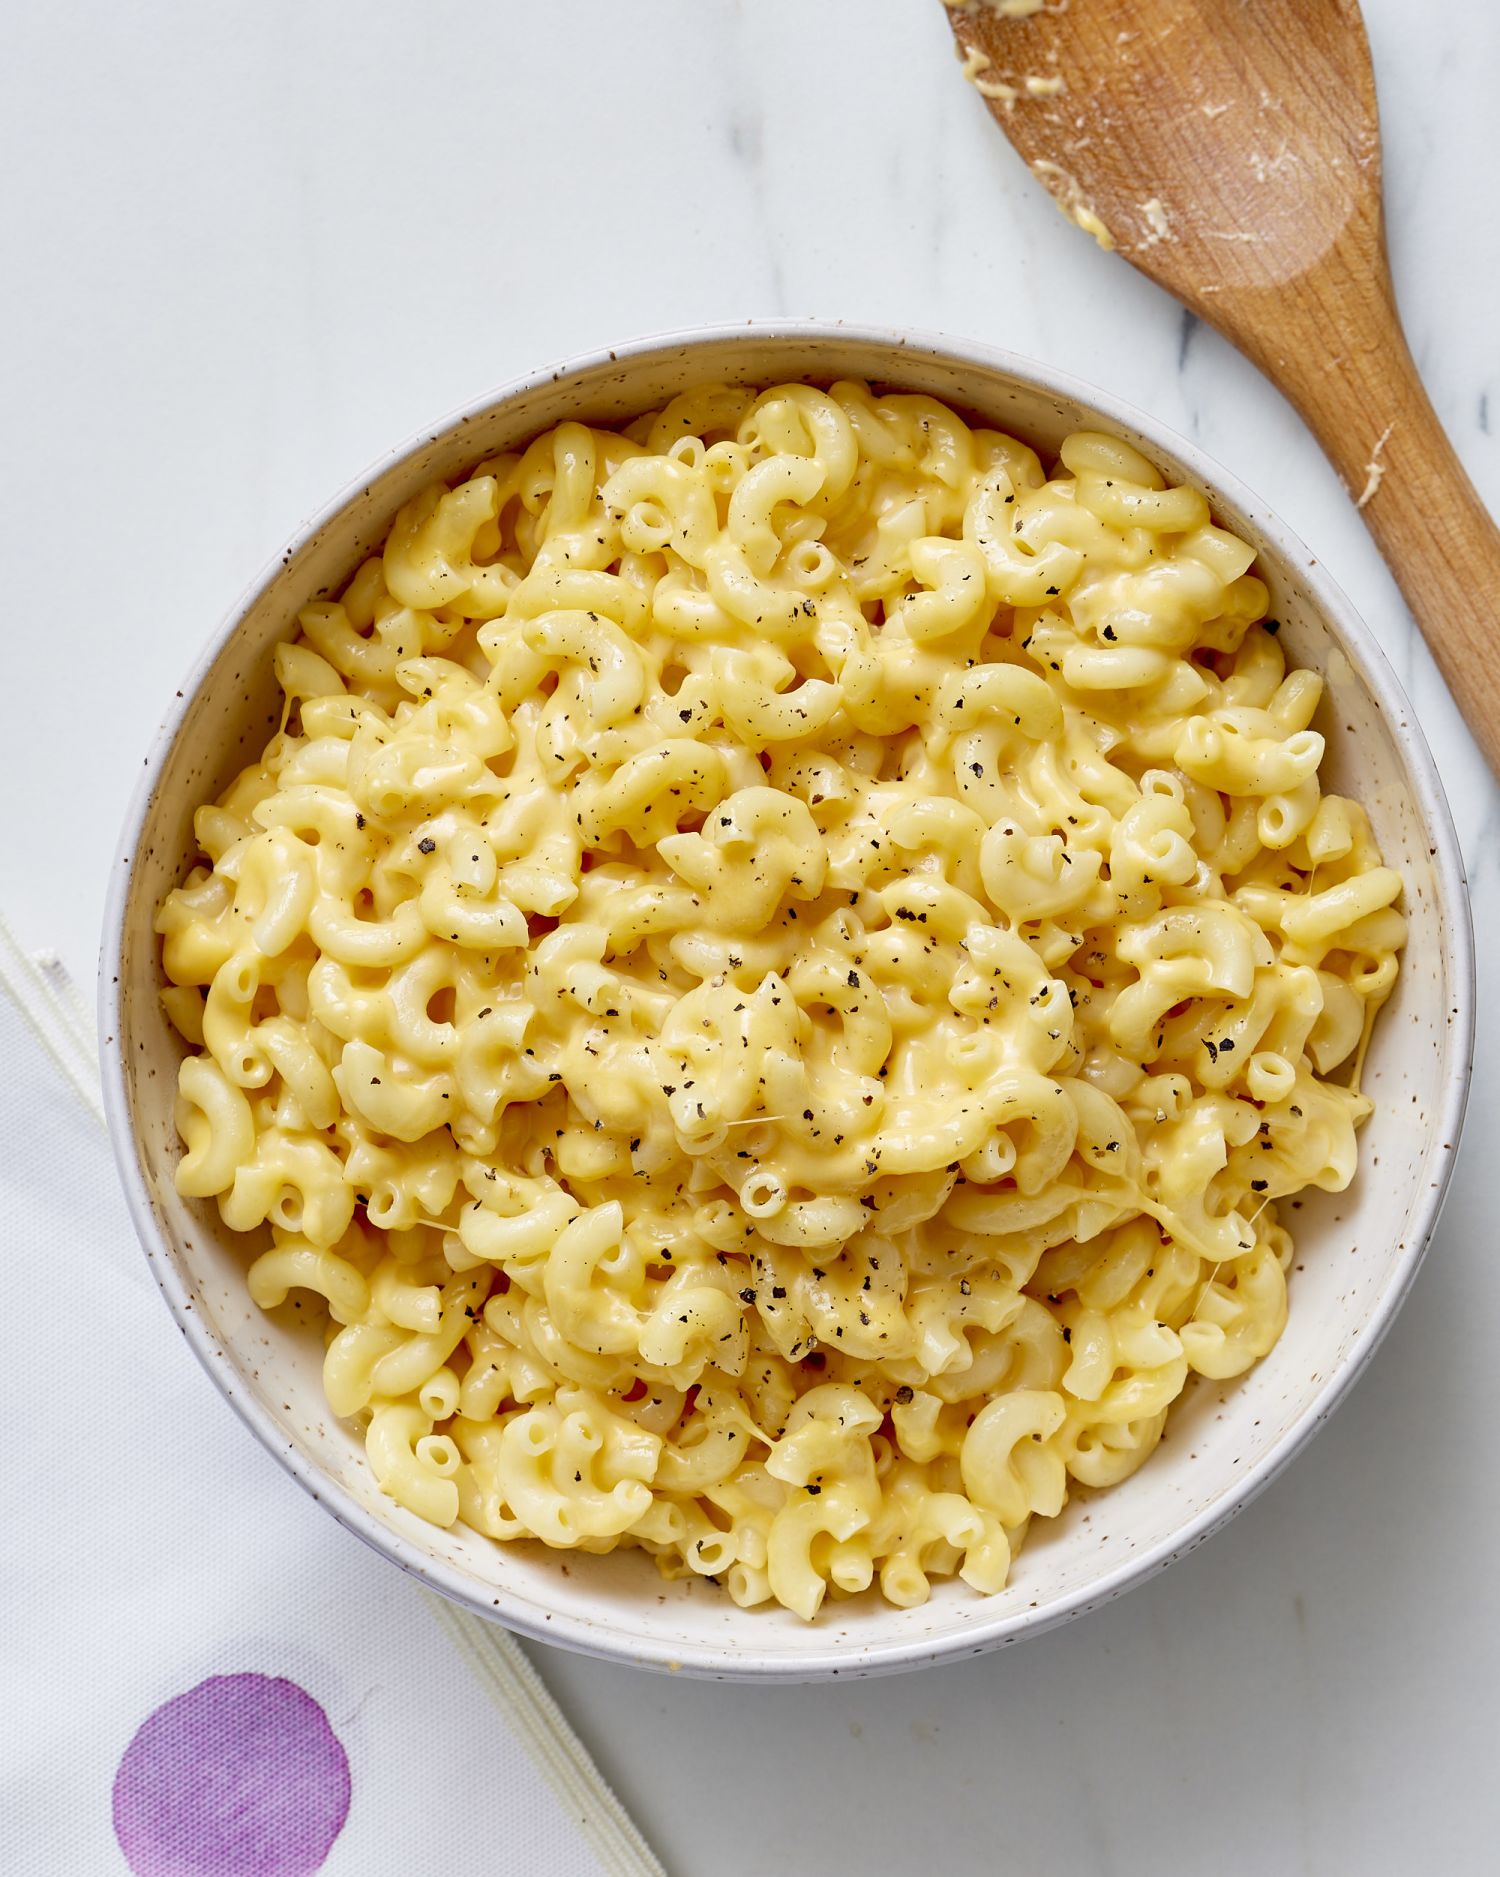 How to make simple cheese sauce for mac and cheese